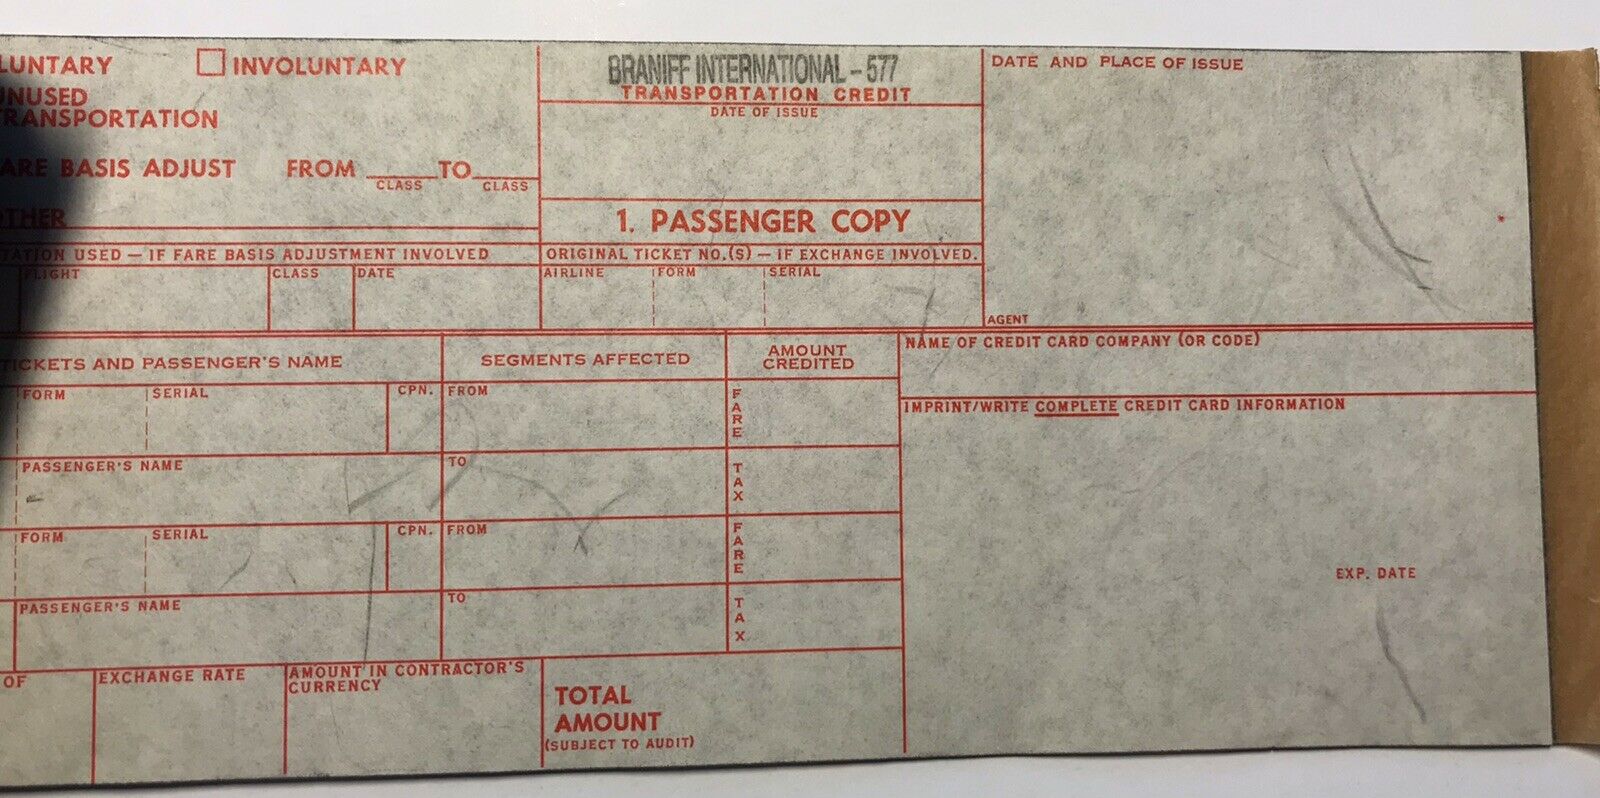 Braniff Airlines Dallas Tx Transportation Credit Form Pilot Collectible